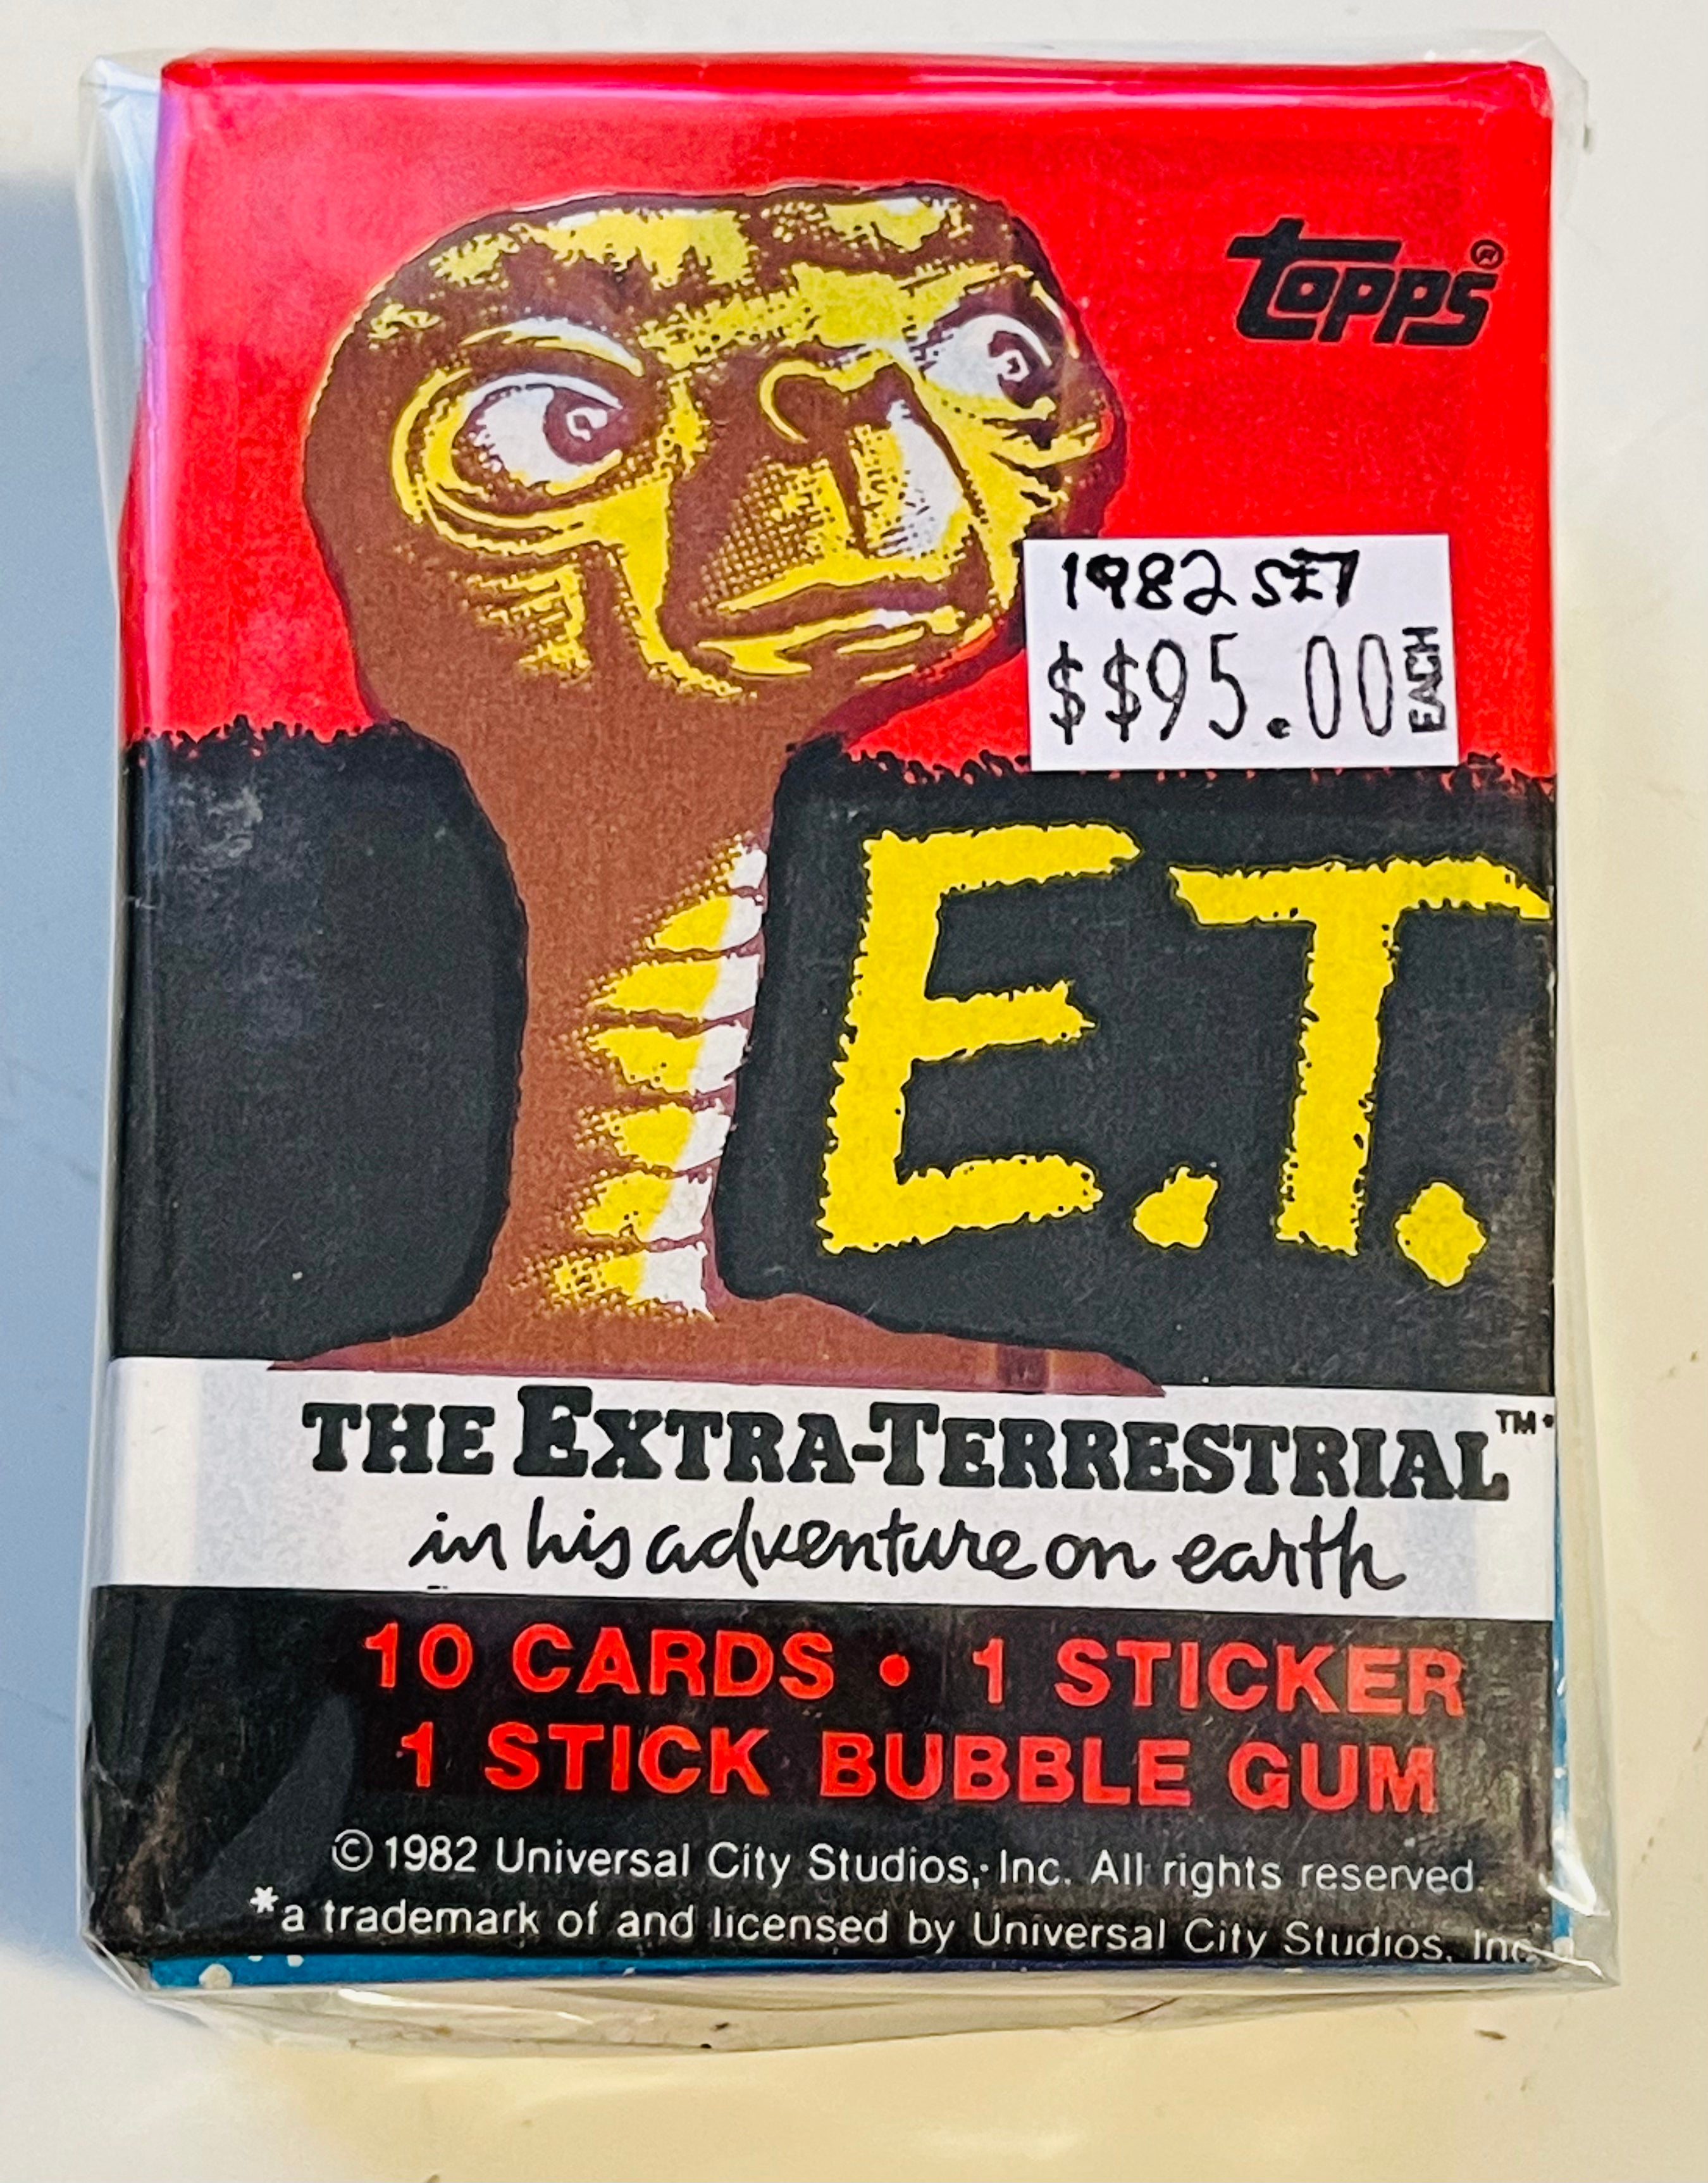 E.T. Movie rare cards and stickers set with wrapper 1982